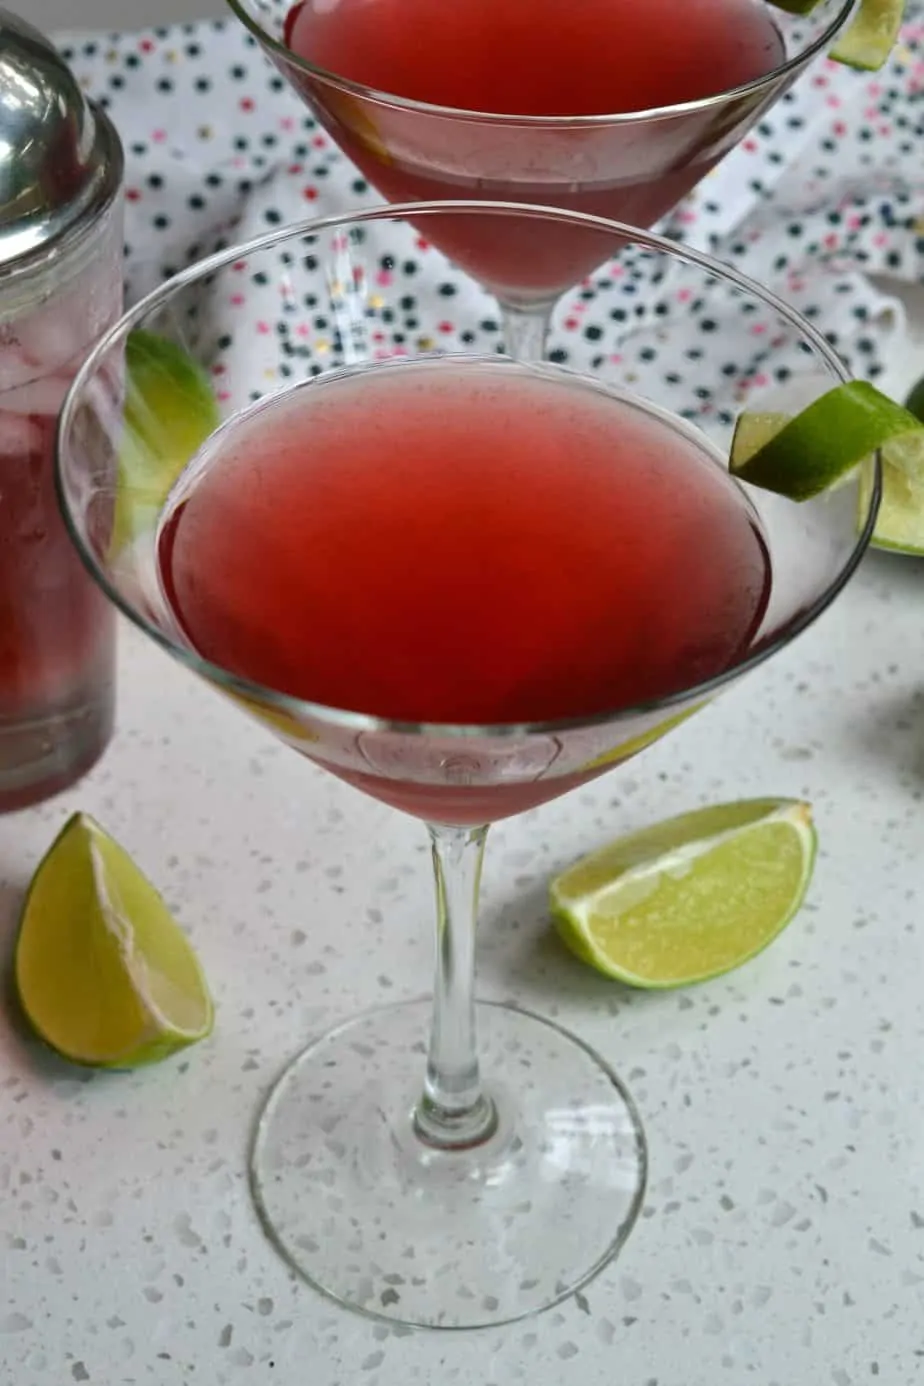 This tasty and gorgeous cranberry orange Cosmopolitan Drink is made in less than two minutes in a cocktail shaker.